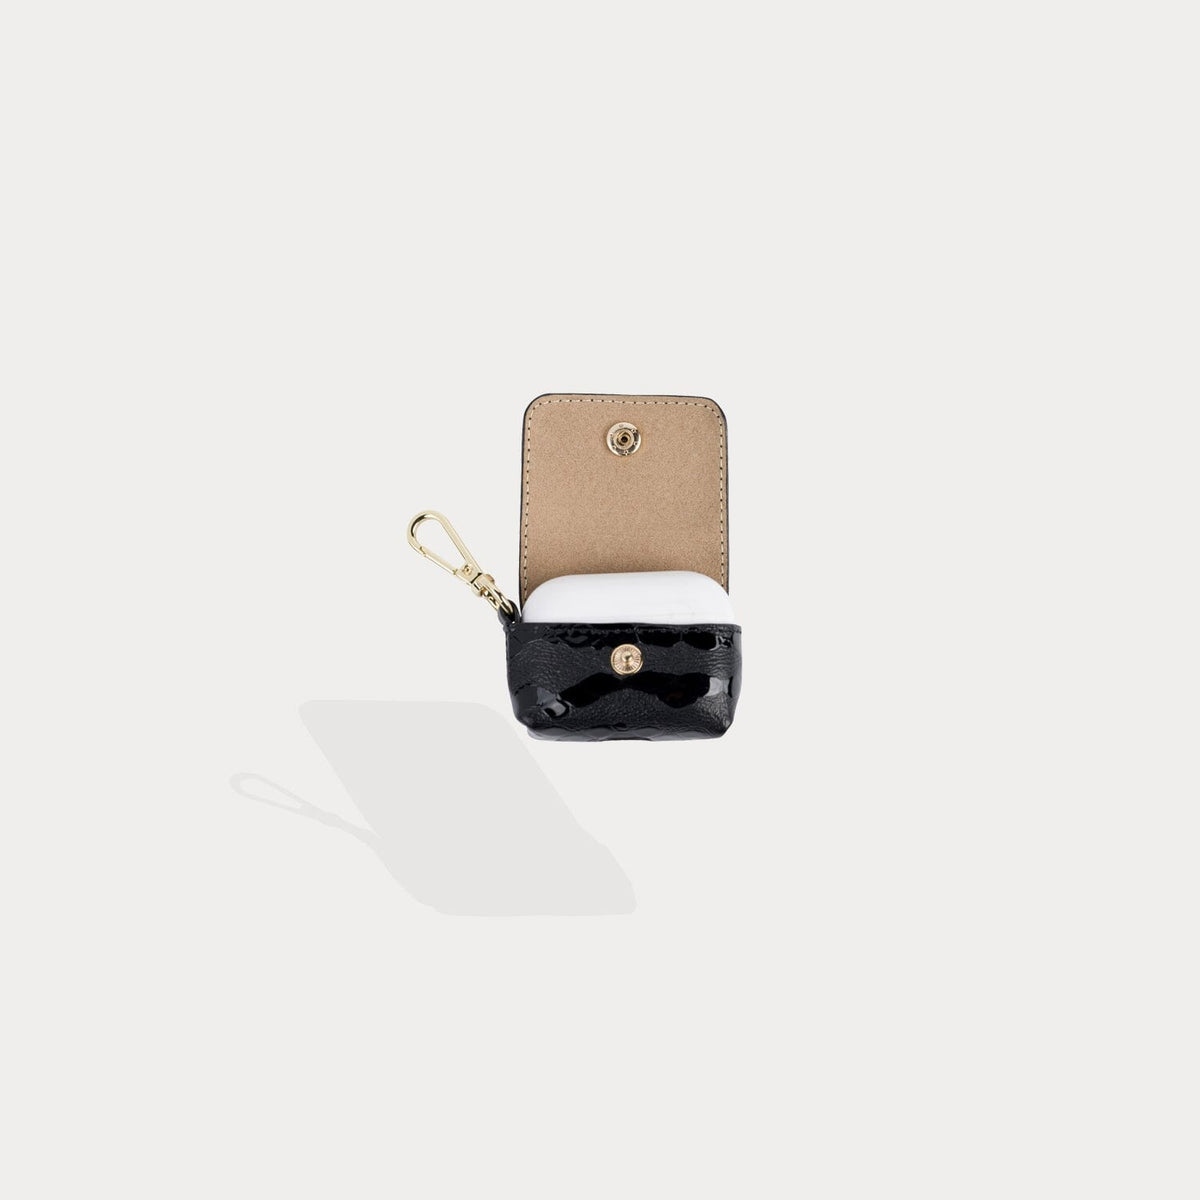 Keep Your AirPods Safe With These Chic Designer Cases By Fendi